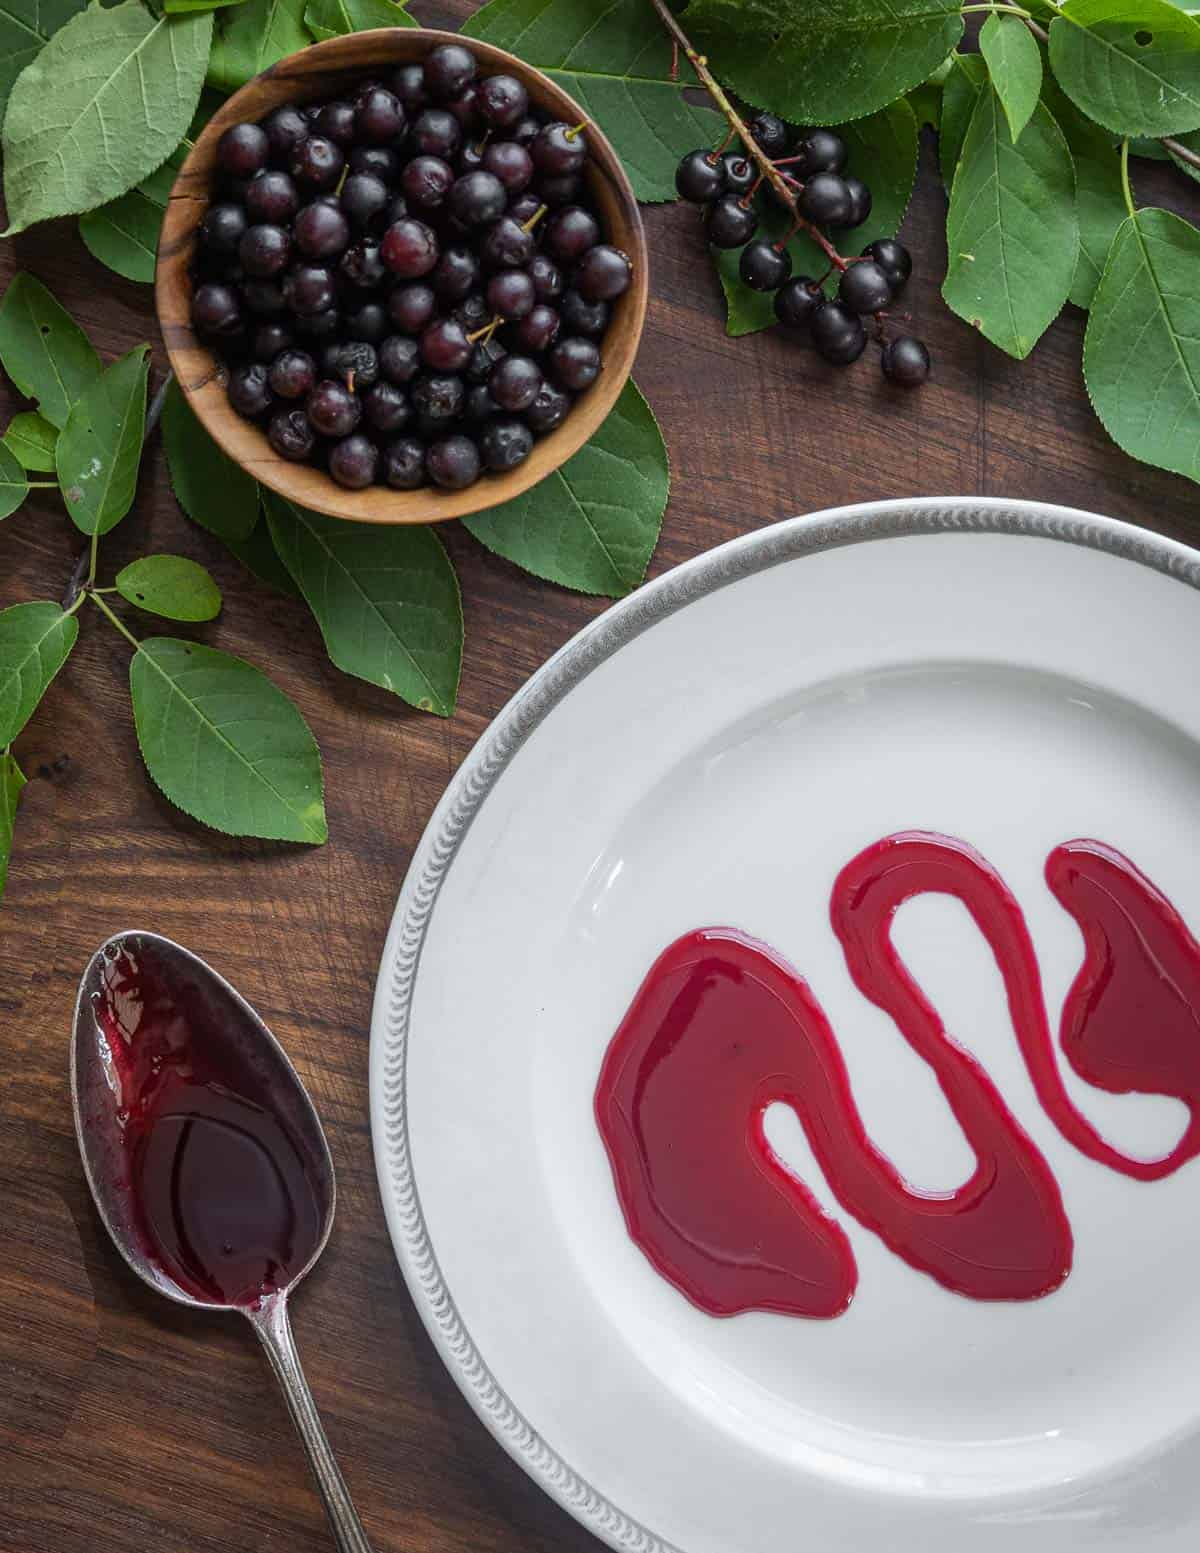 Chokecherry syrup on a plate surrounded by cherry leaves and wild cherries. 